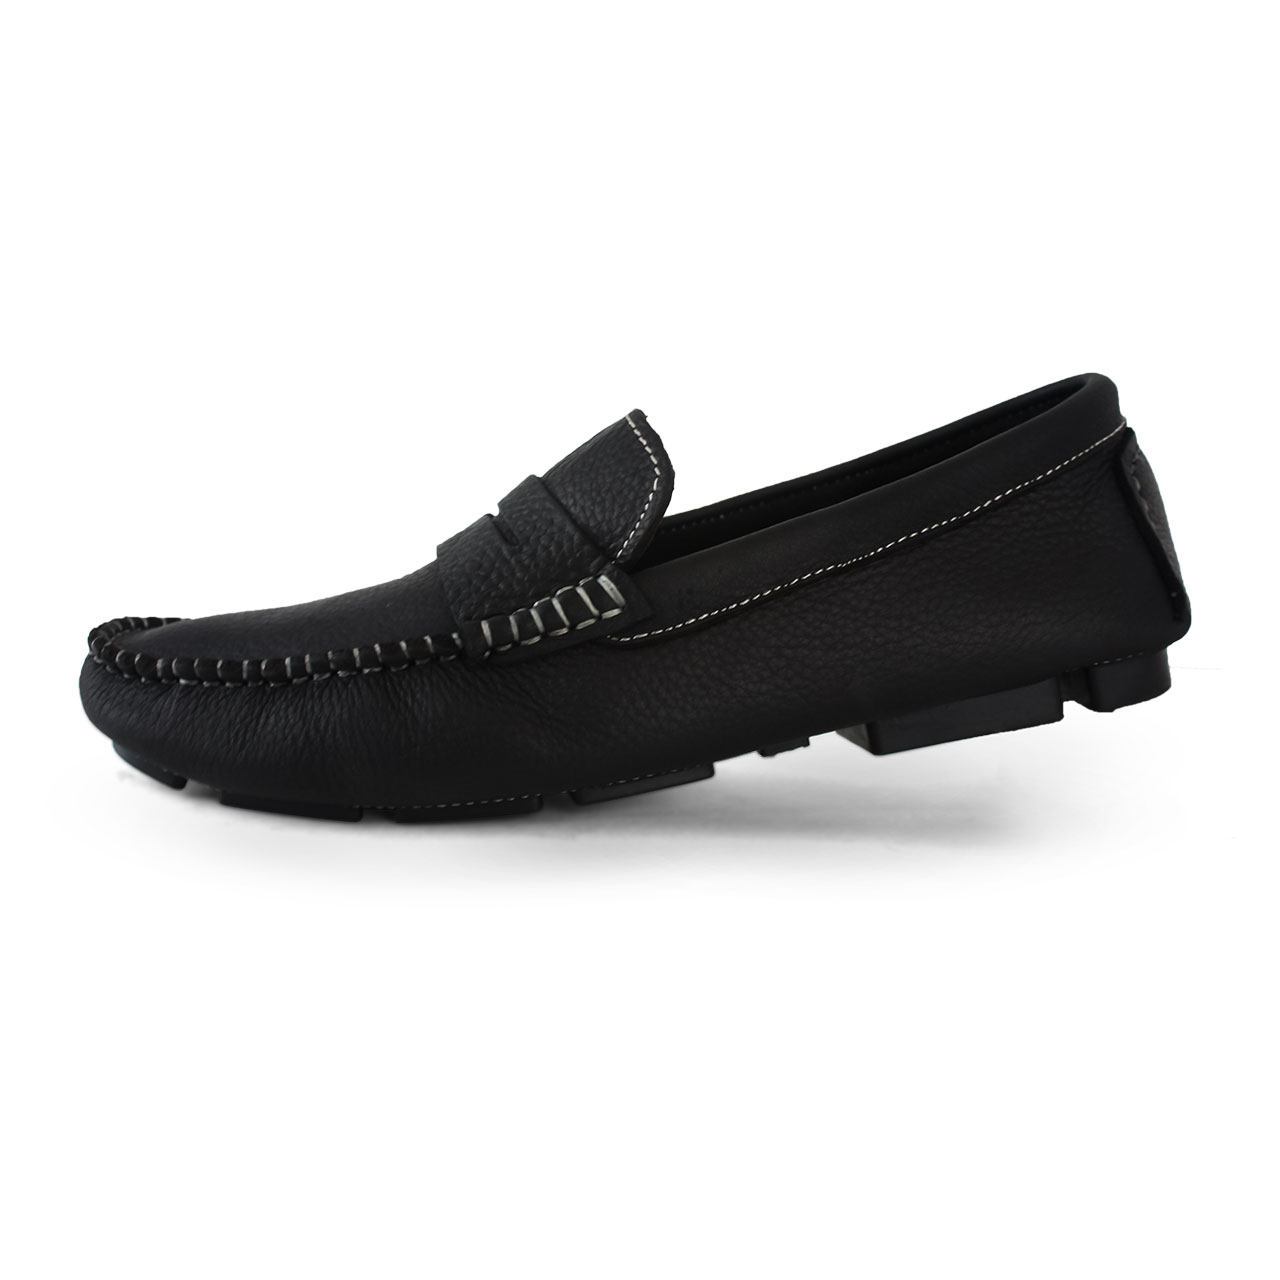 Suede Black Loafers Mens Penny Loafer With Heel Flats Slip-On Shoes